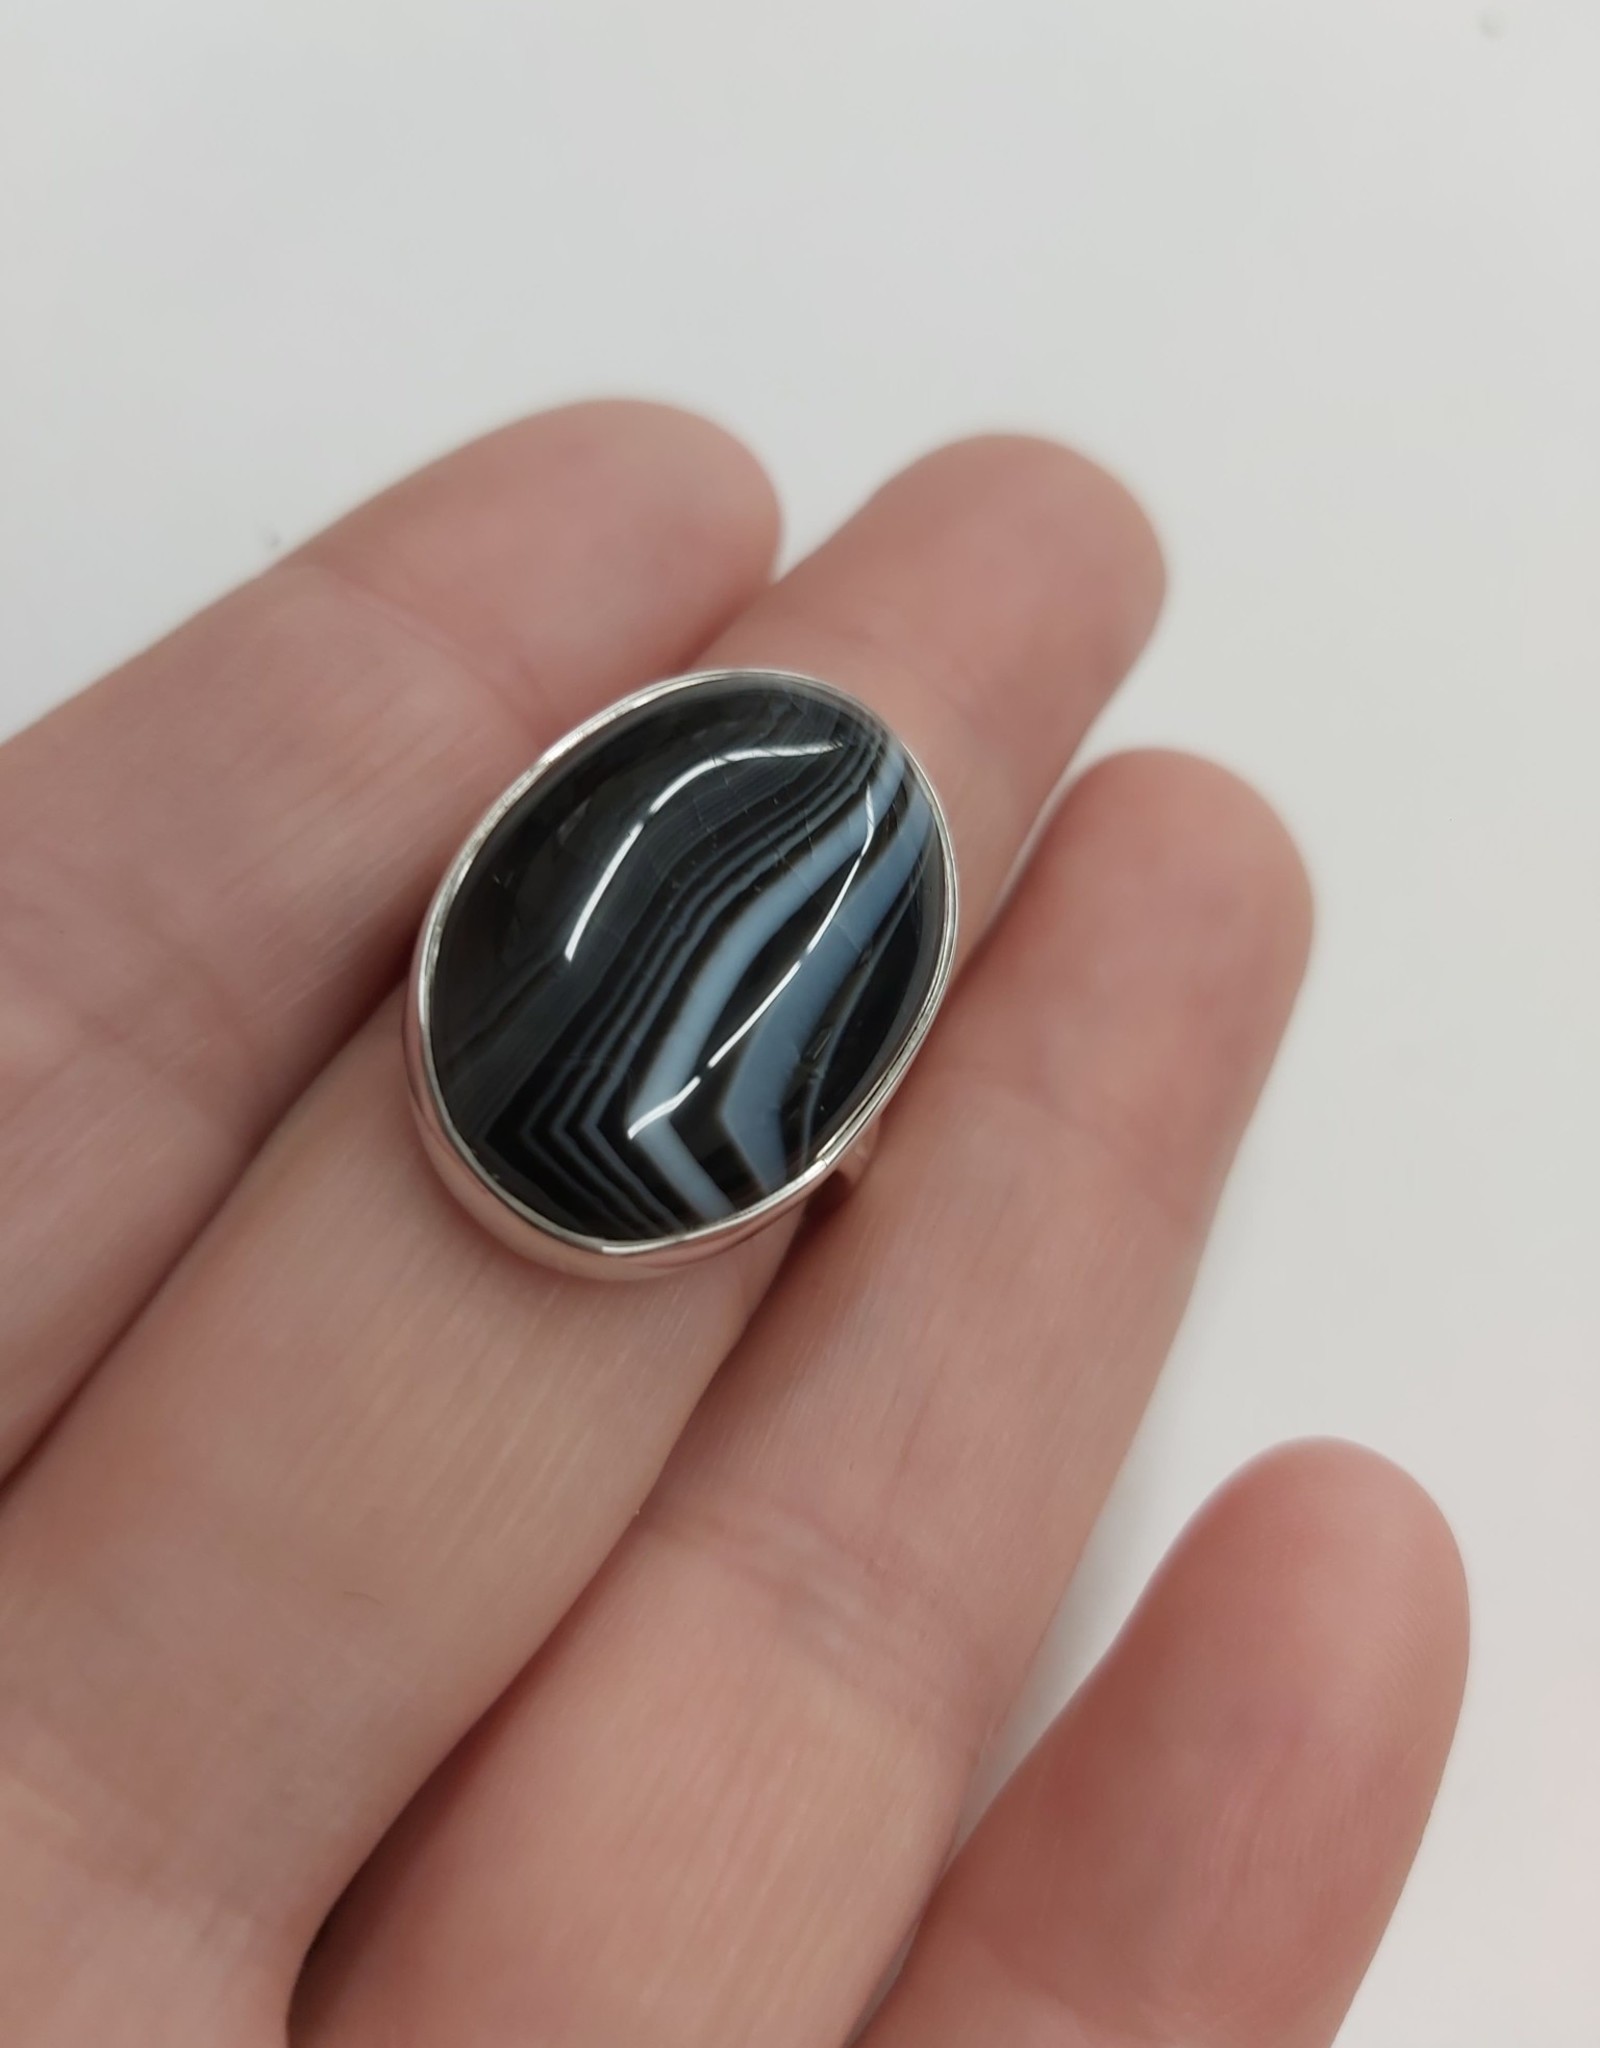 Onyx Ring - Size 7 Sterling Silver